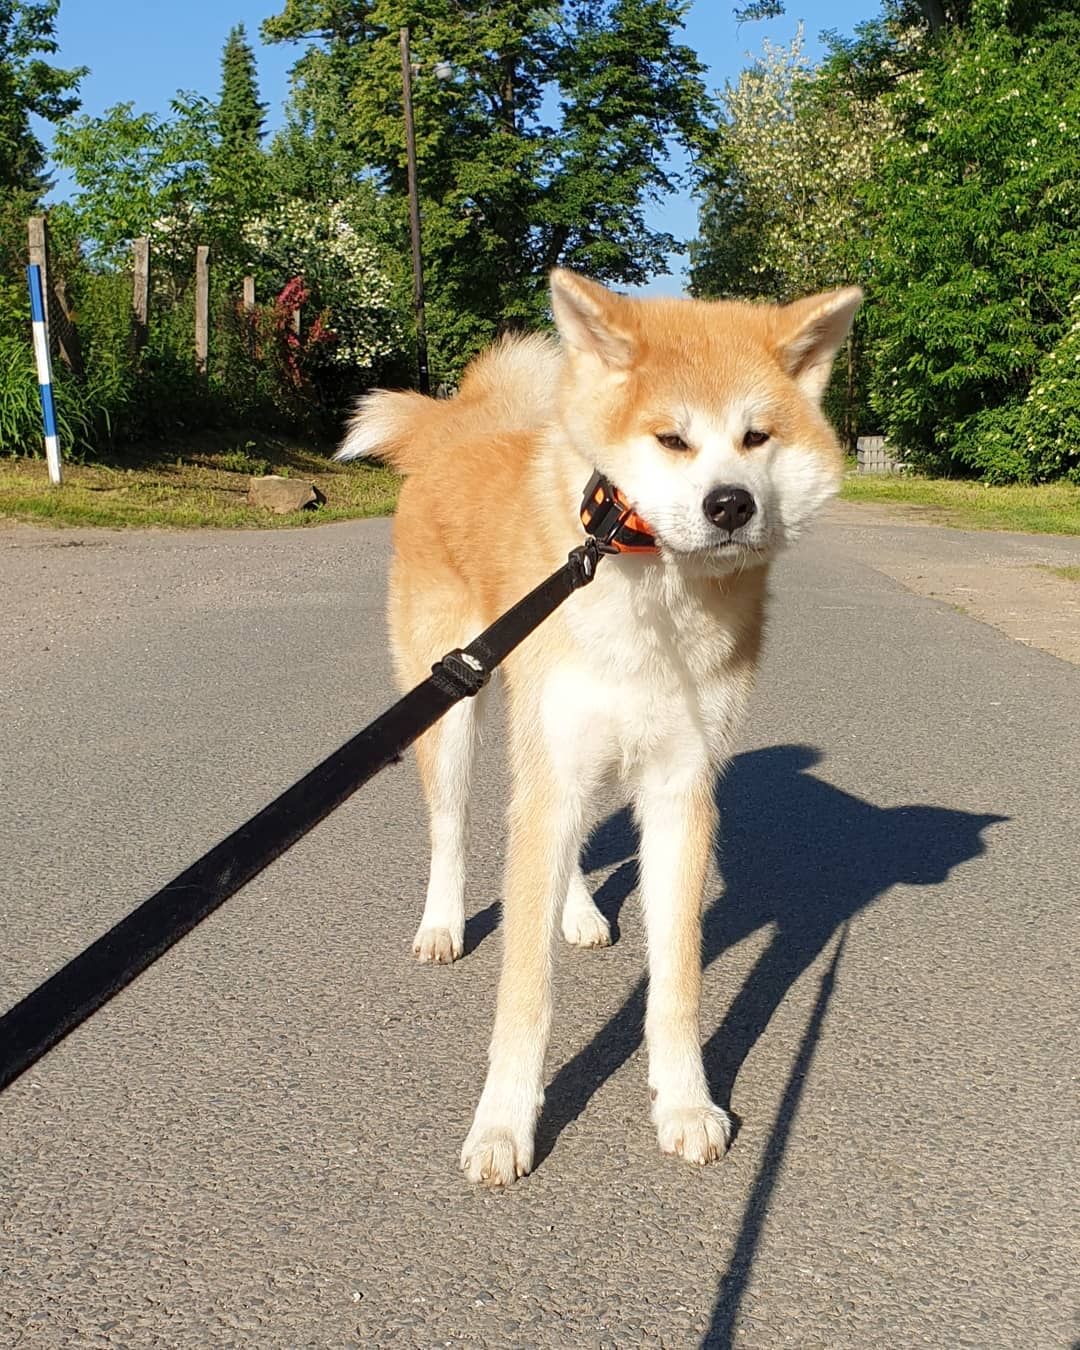 Akita standing on the road while its leash is being pulled